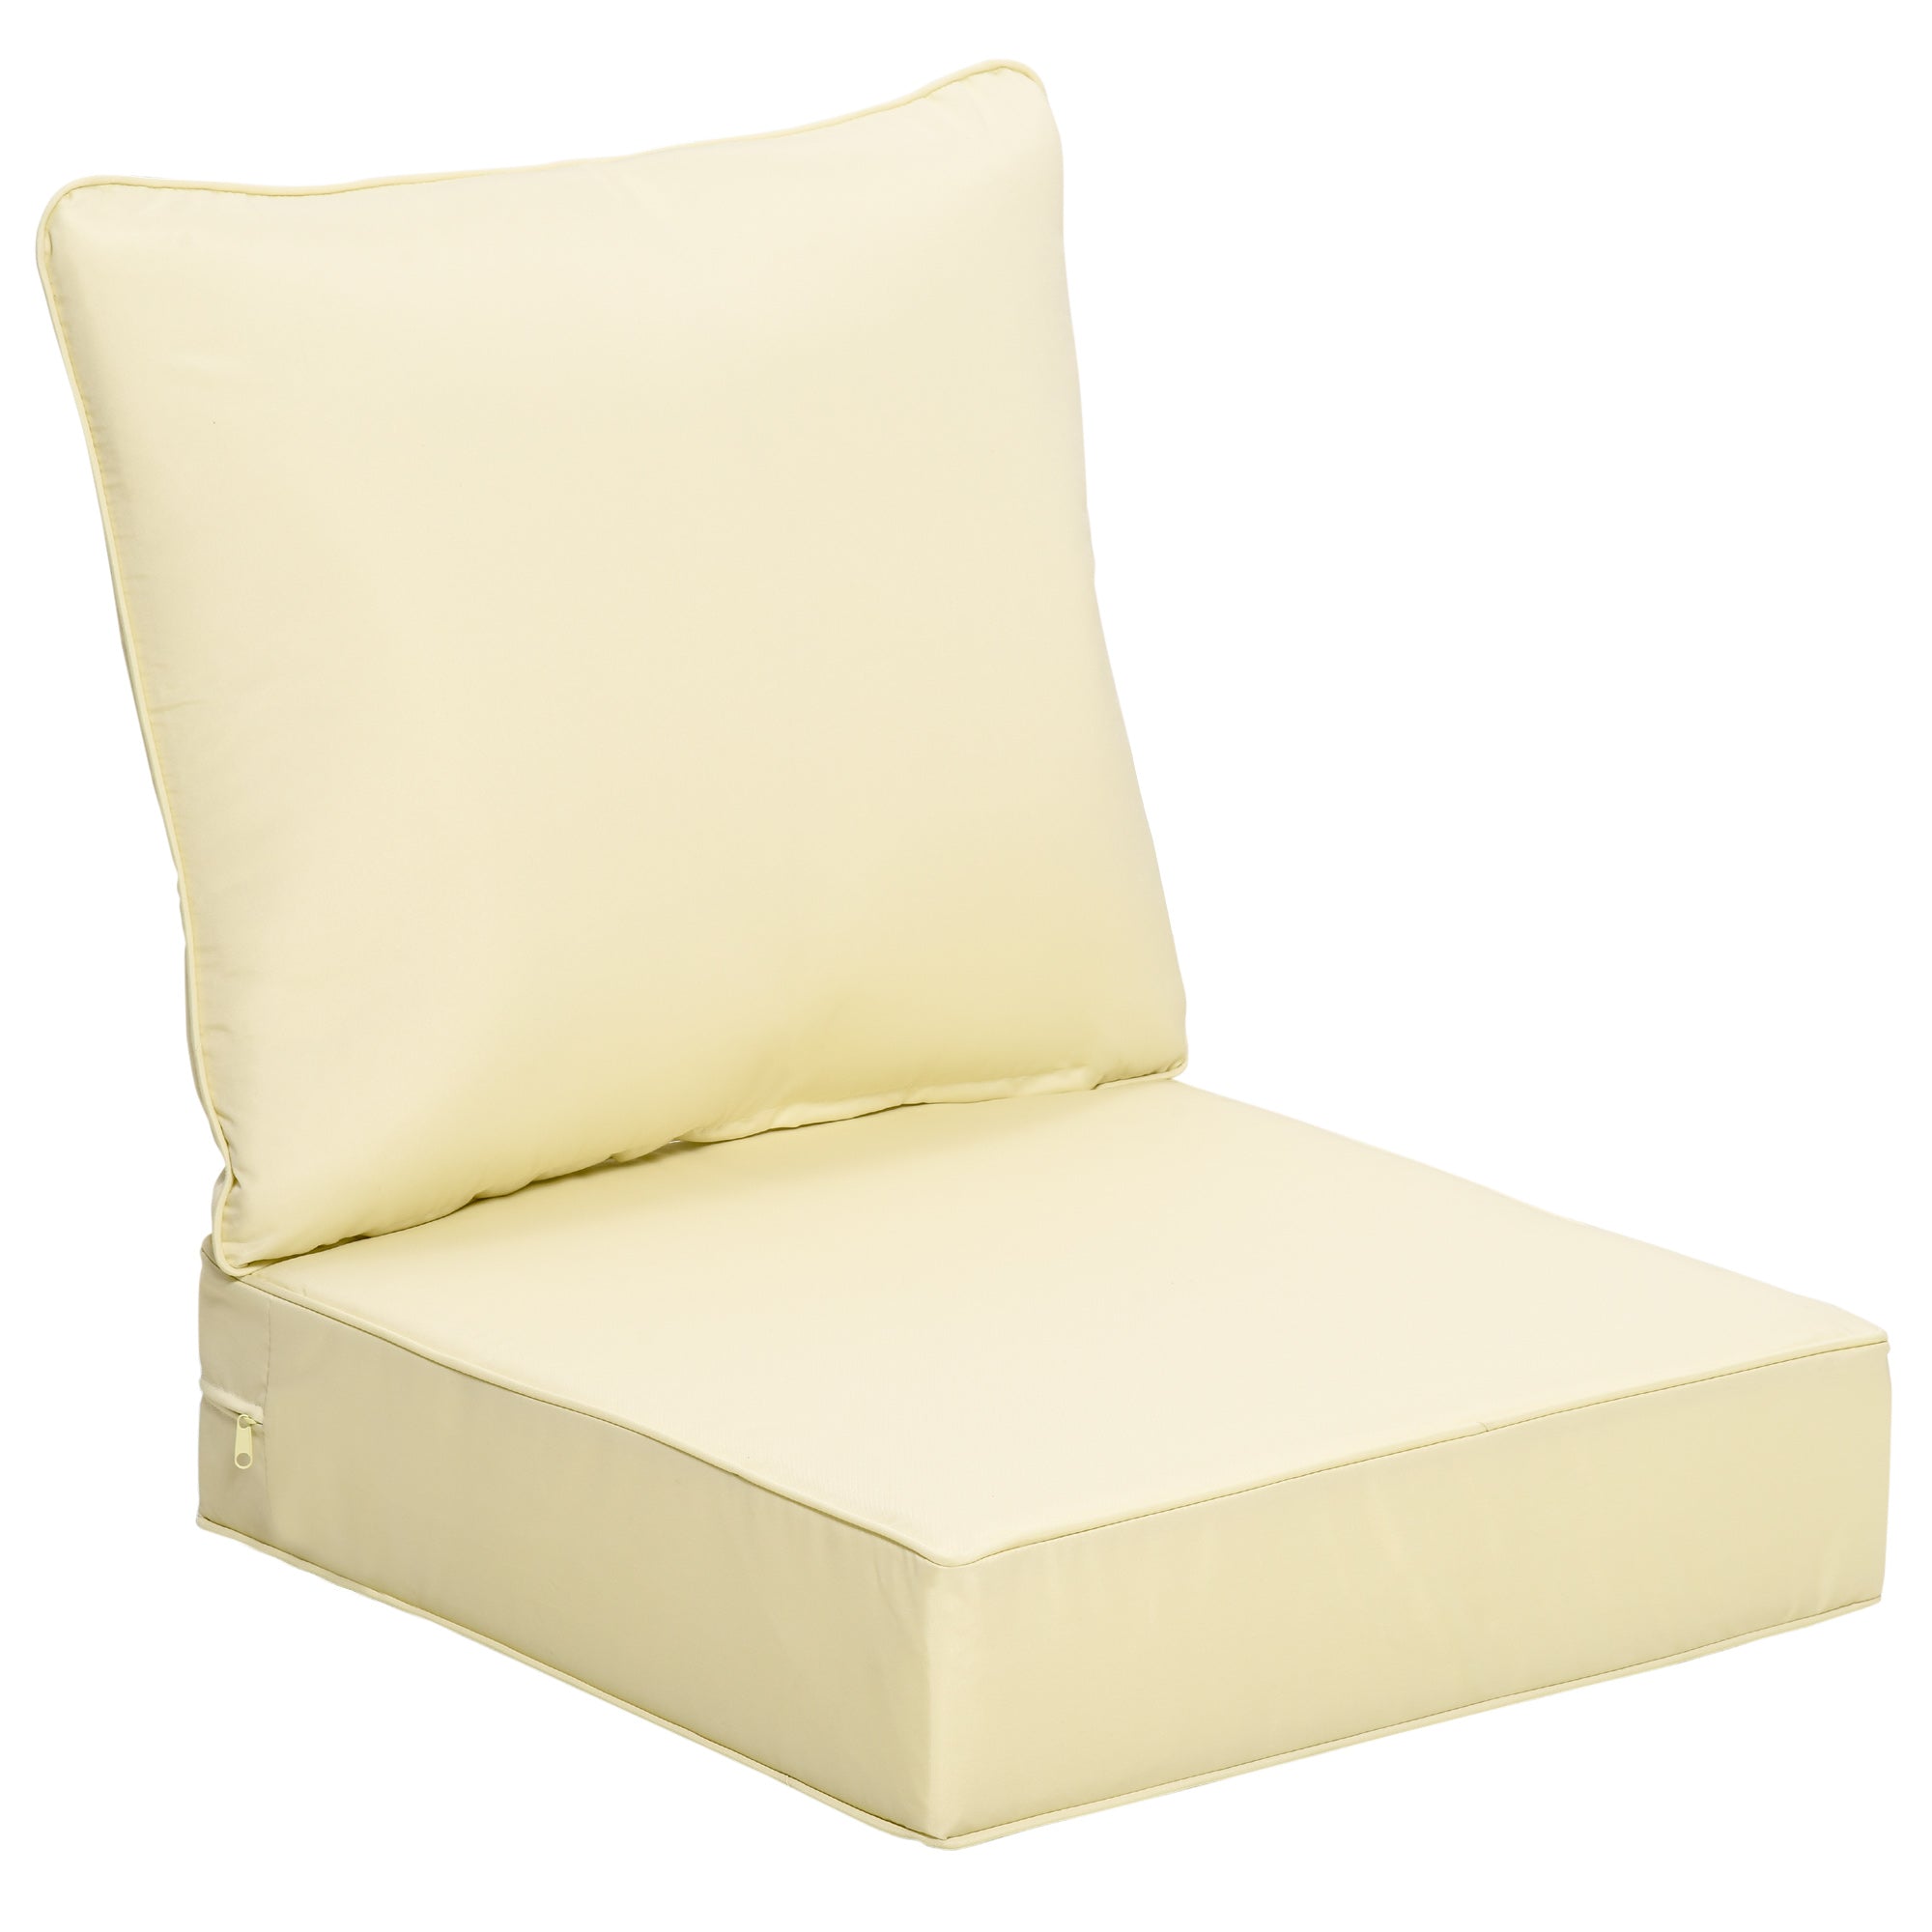 Outsunny Outdoor Seat and Back Cushion Set - Deep Seating Chair Cushion - Beige  | TJ Hughes